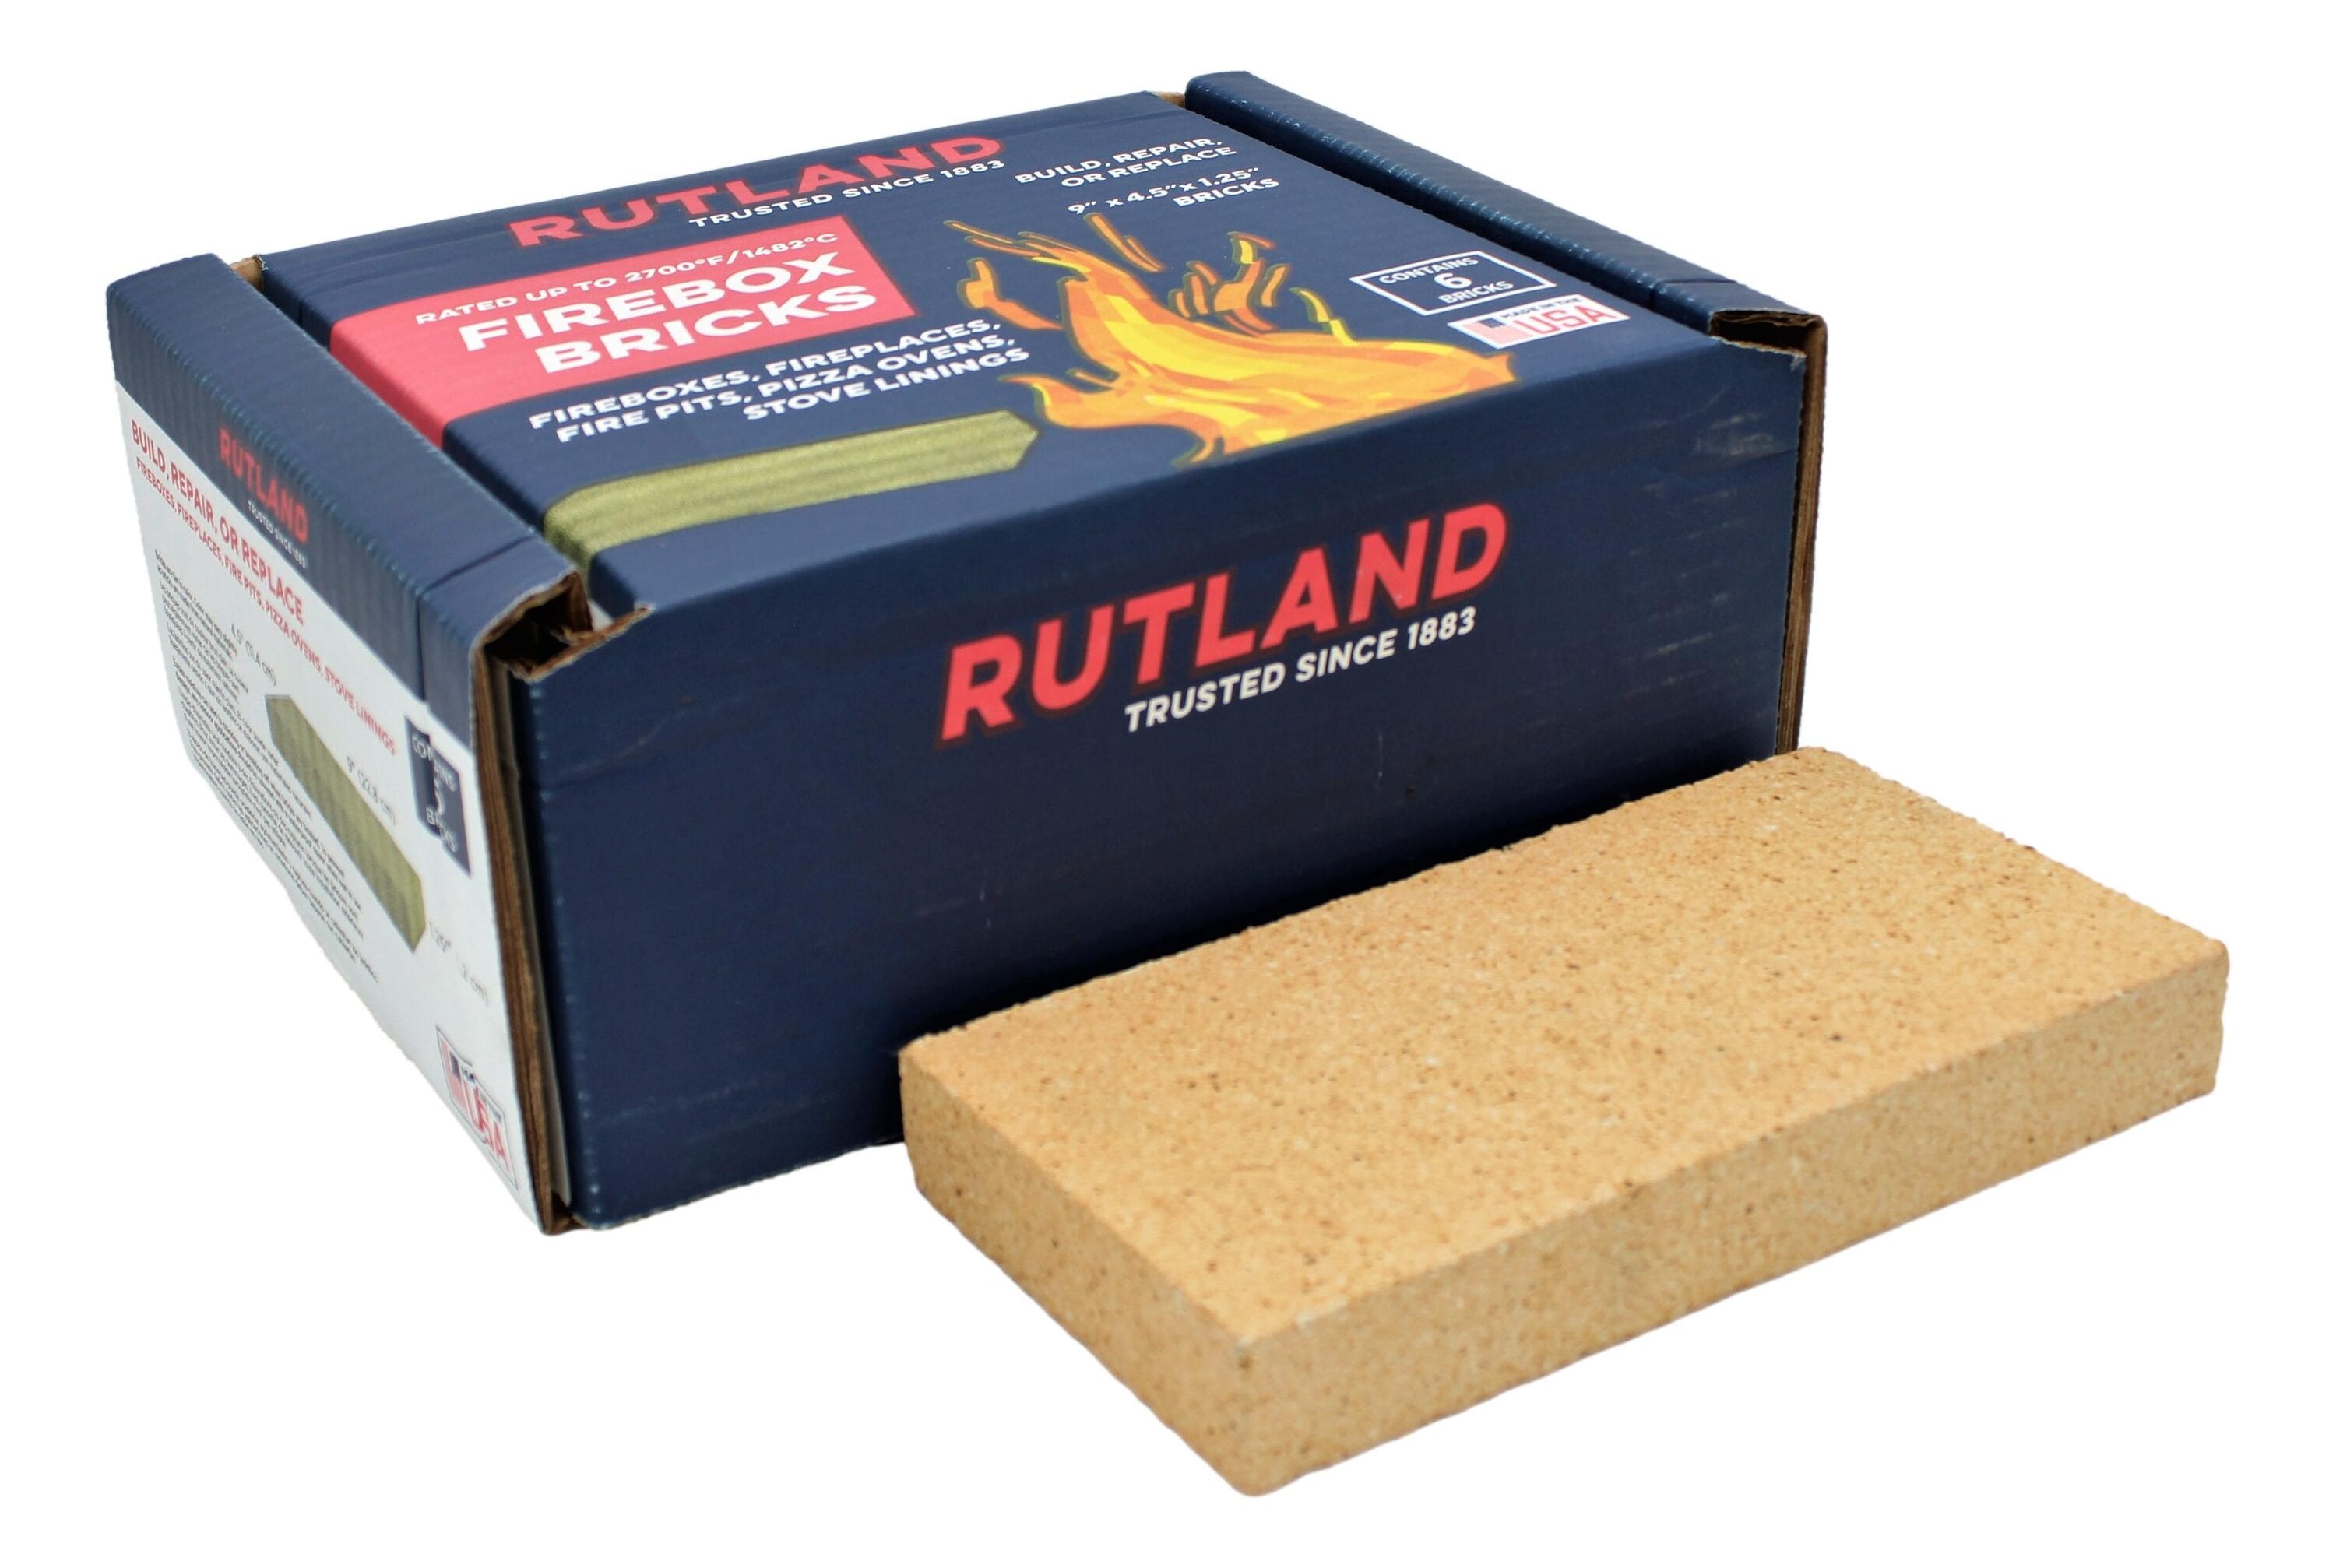 XL PLUS - High Fire Refractory Cement